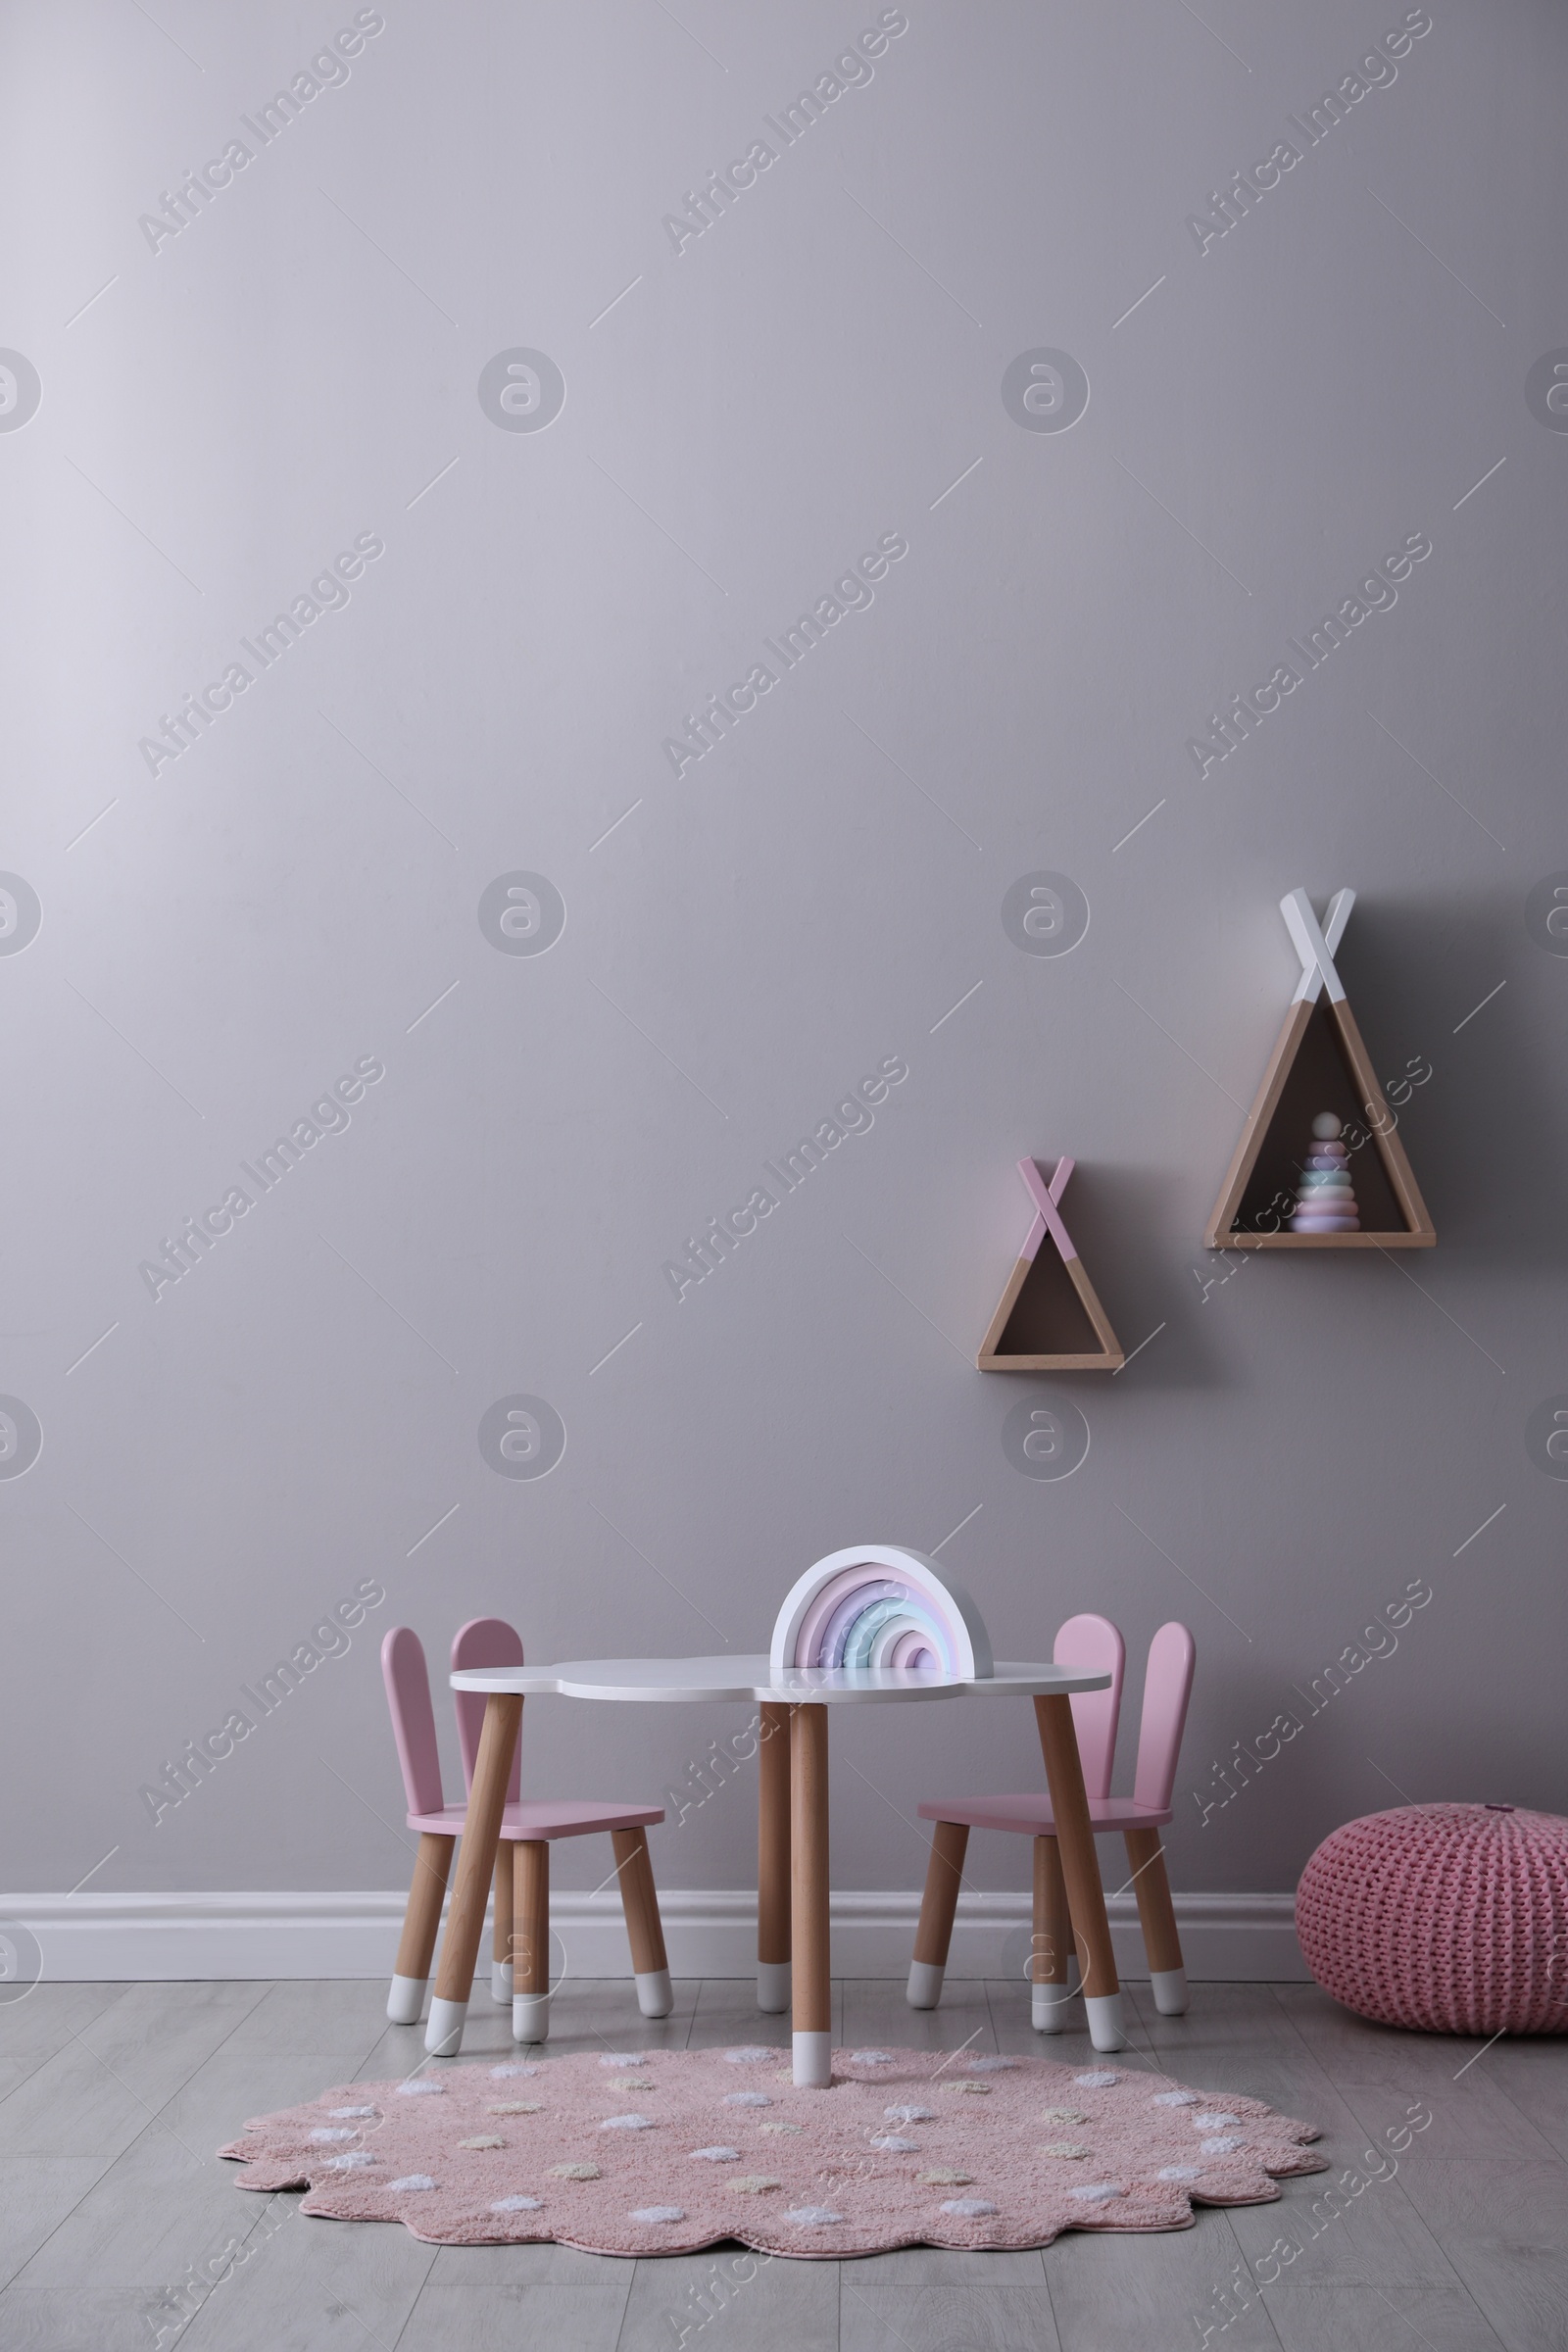 Photo of Cute child room interior with furniture, toys and wigwam shaped shelves on grey wall